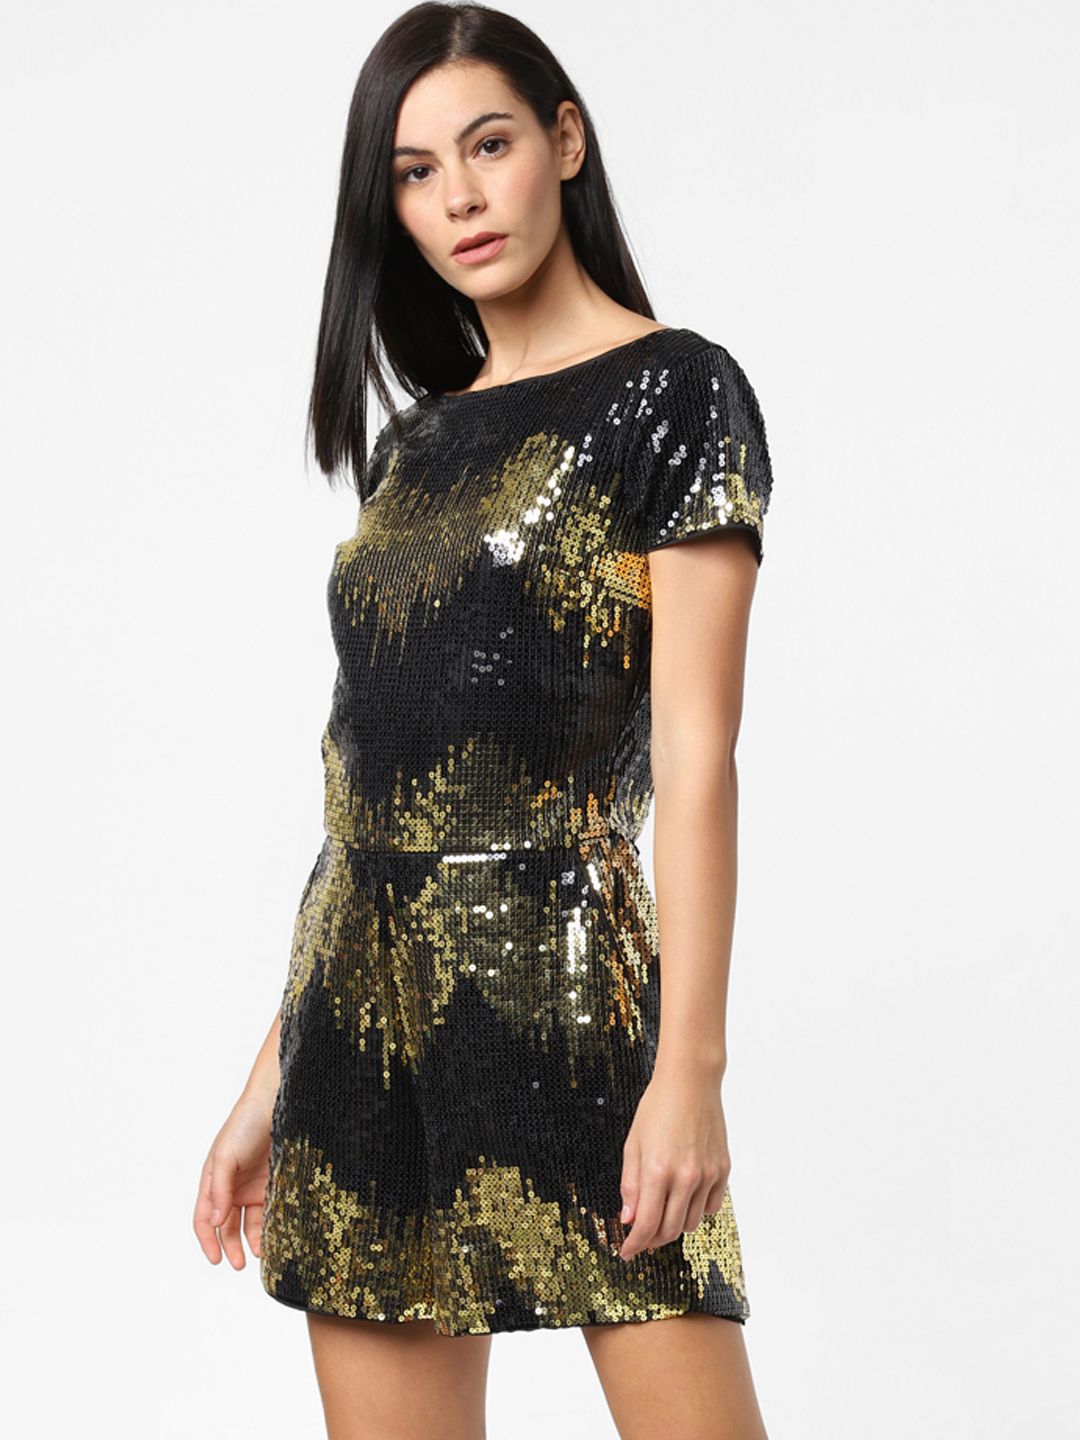 ONLY Women Black & Gold-Toned Embellished Playsuit Price in India